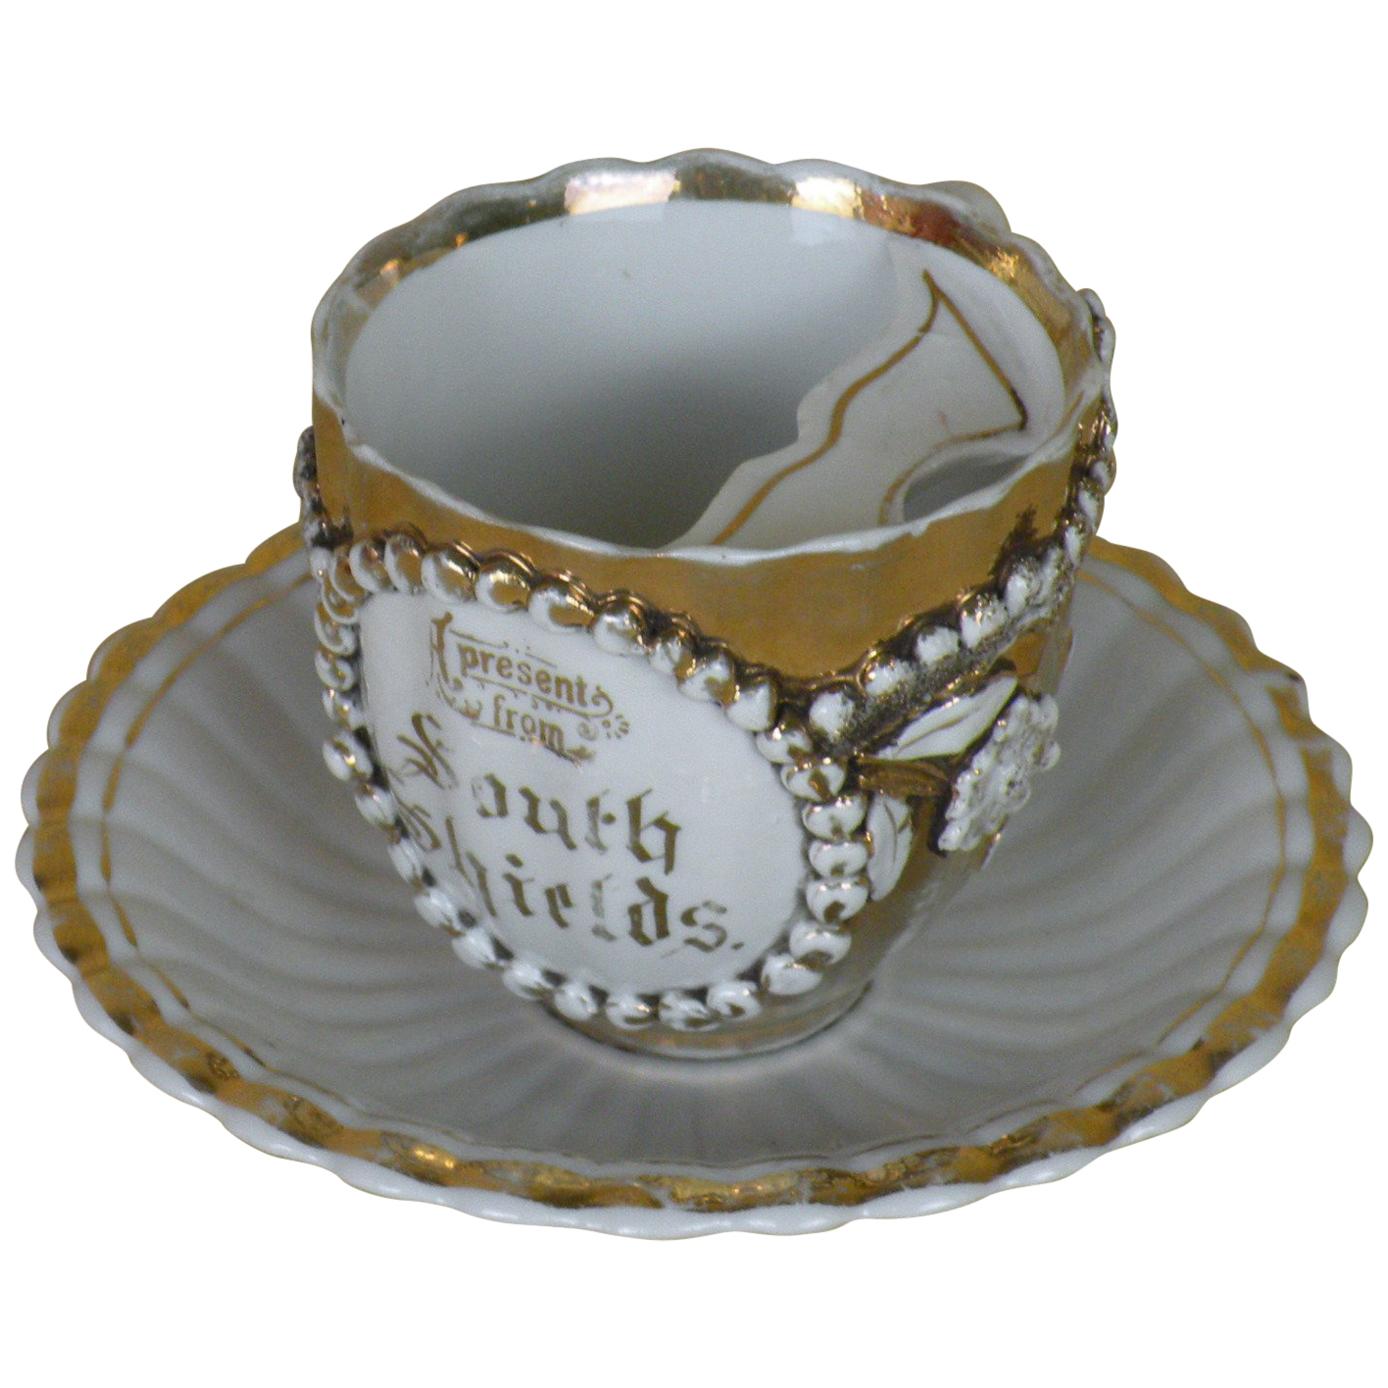 1900s Vintage Gilded Porcelain Souvenir Mustache Cup and Saucer Made in England For Sale